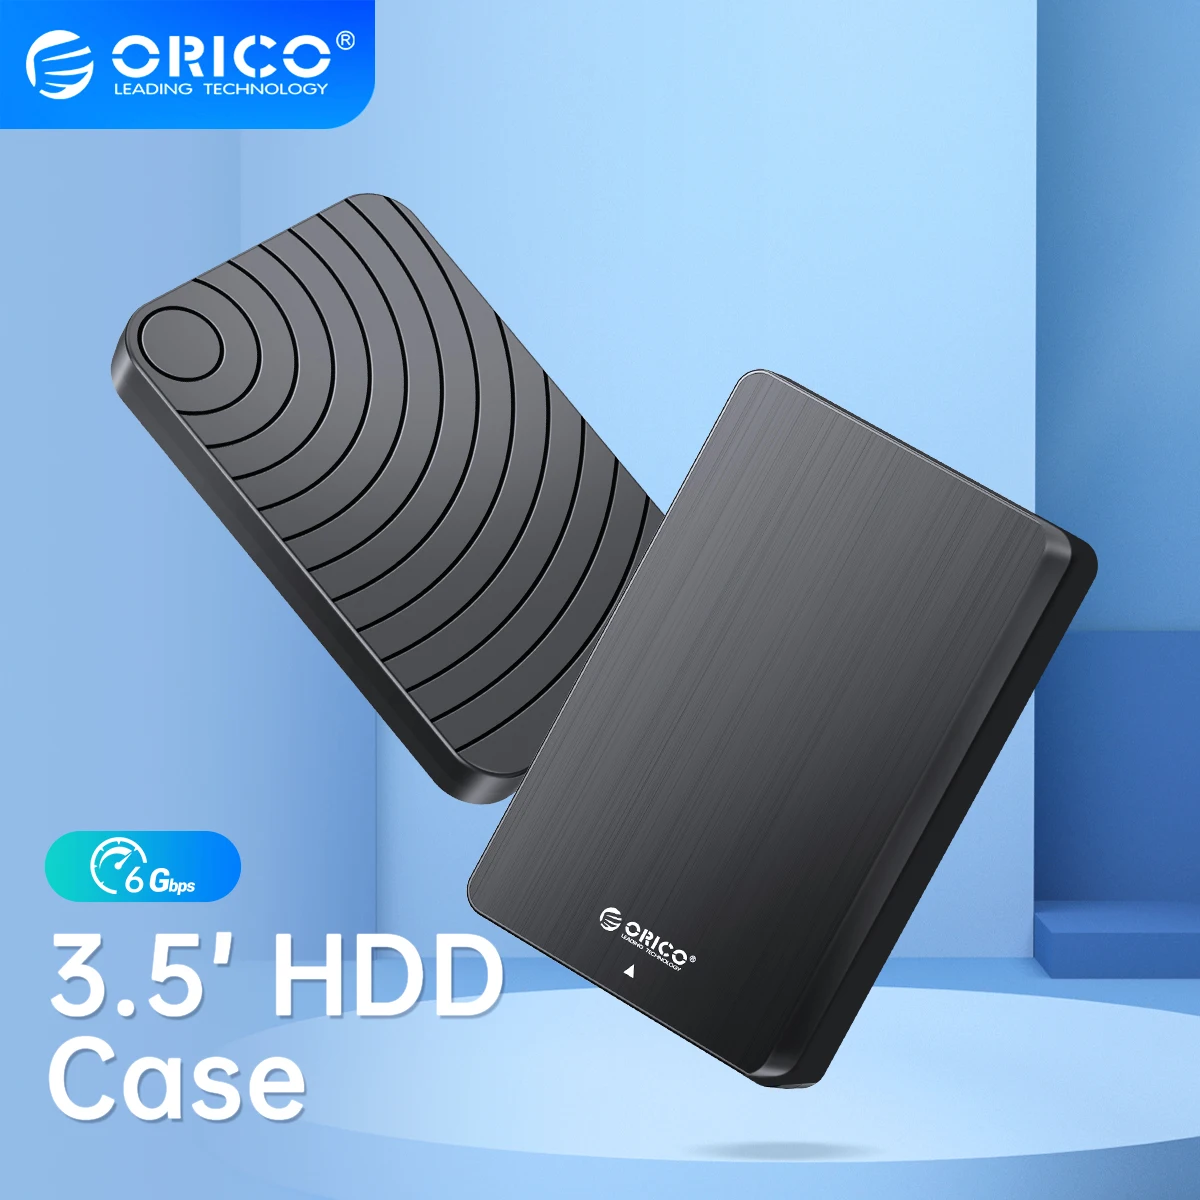 ORICO 3.5" HDD SATA to C External Hard Drive Case for 3.5 inch HDD Enclosure with 12V Power Adapter